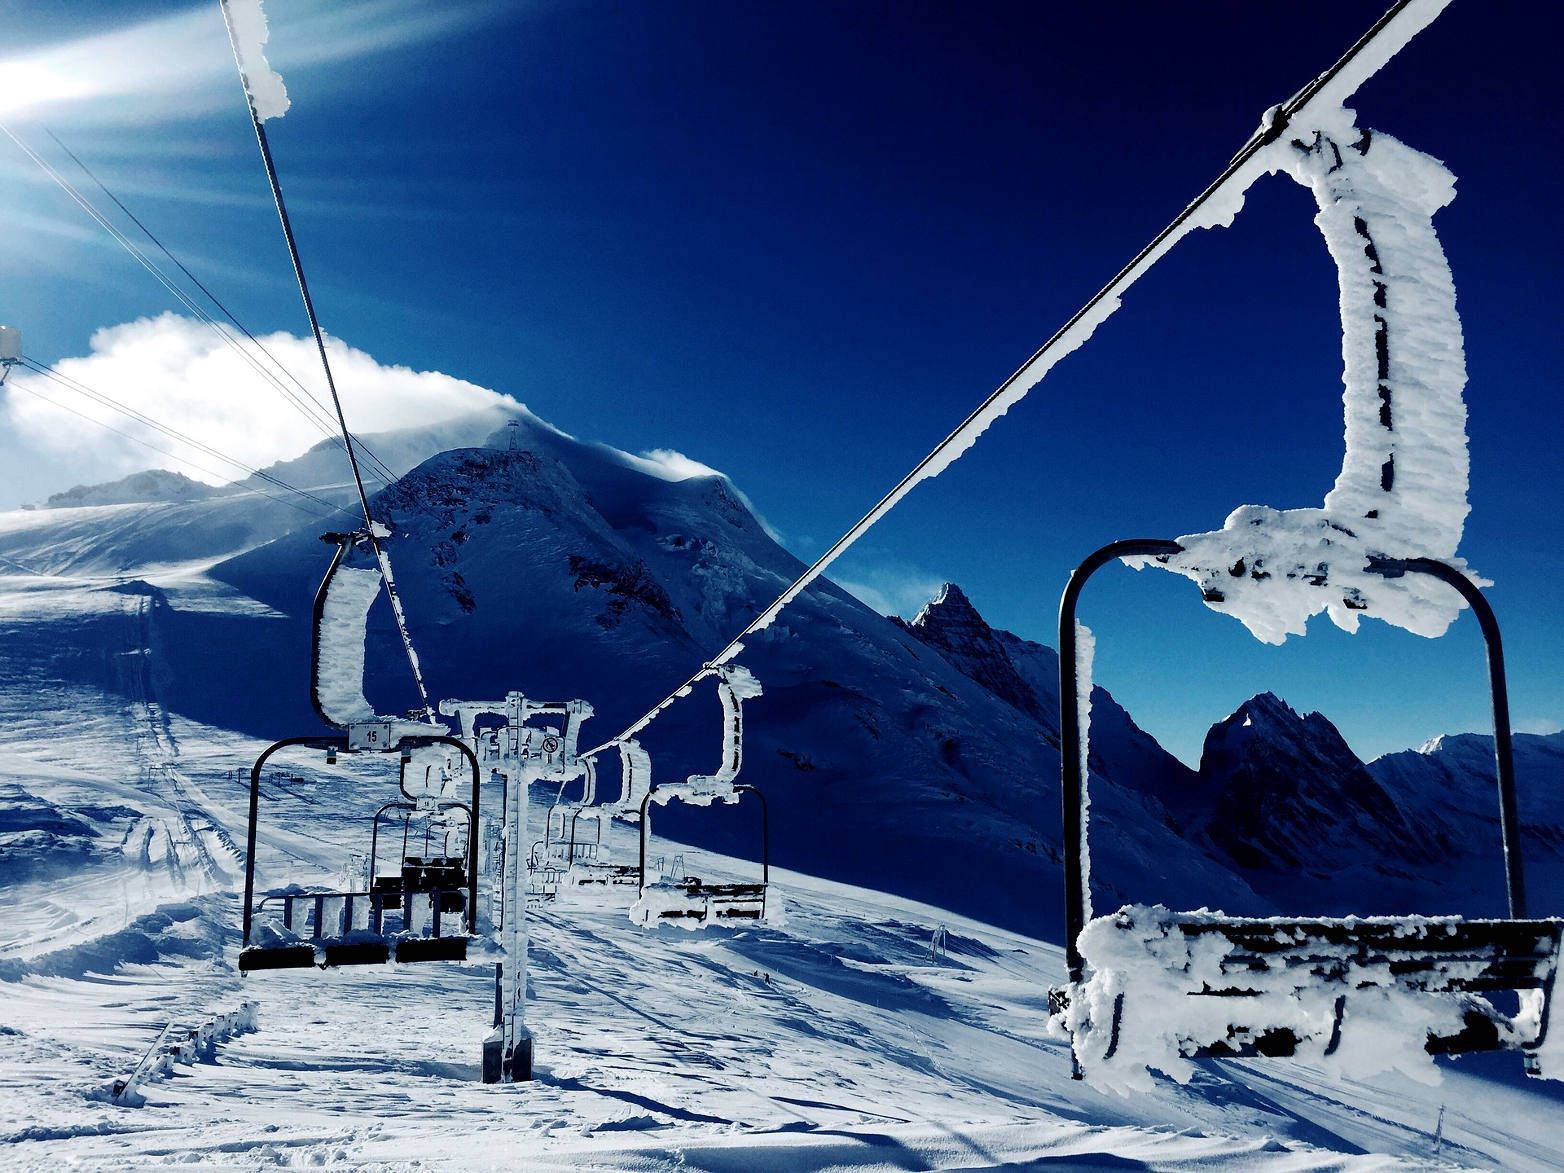 Enlarged view: Chair lift (CC0 1.0 by Free-Photos via pixabay.com)